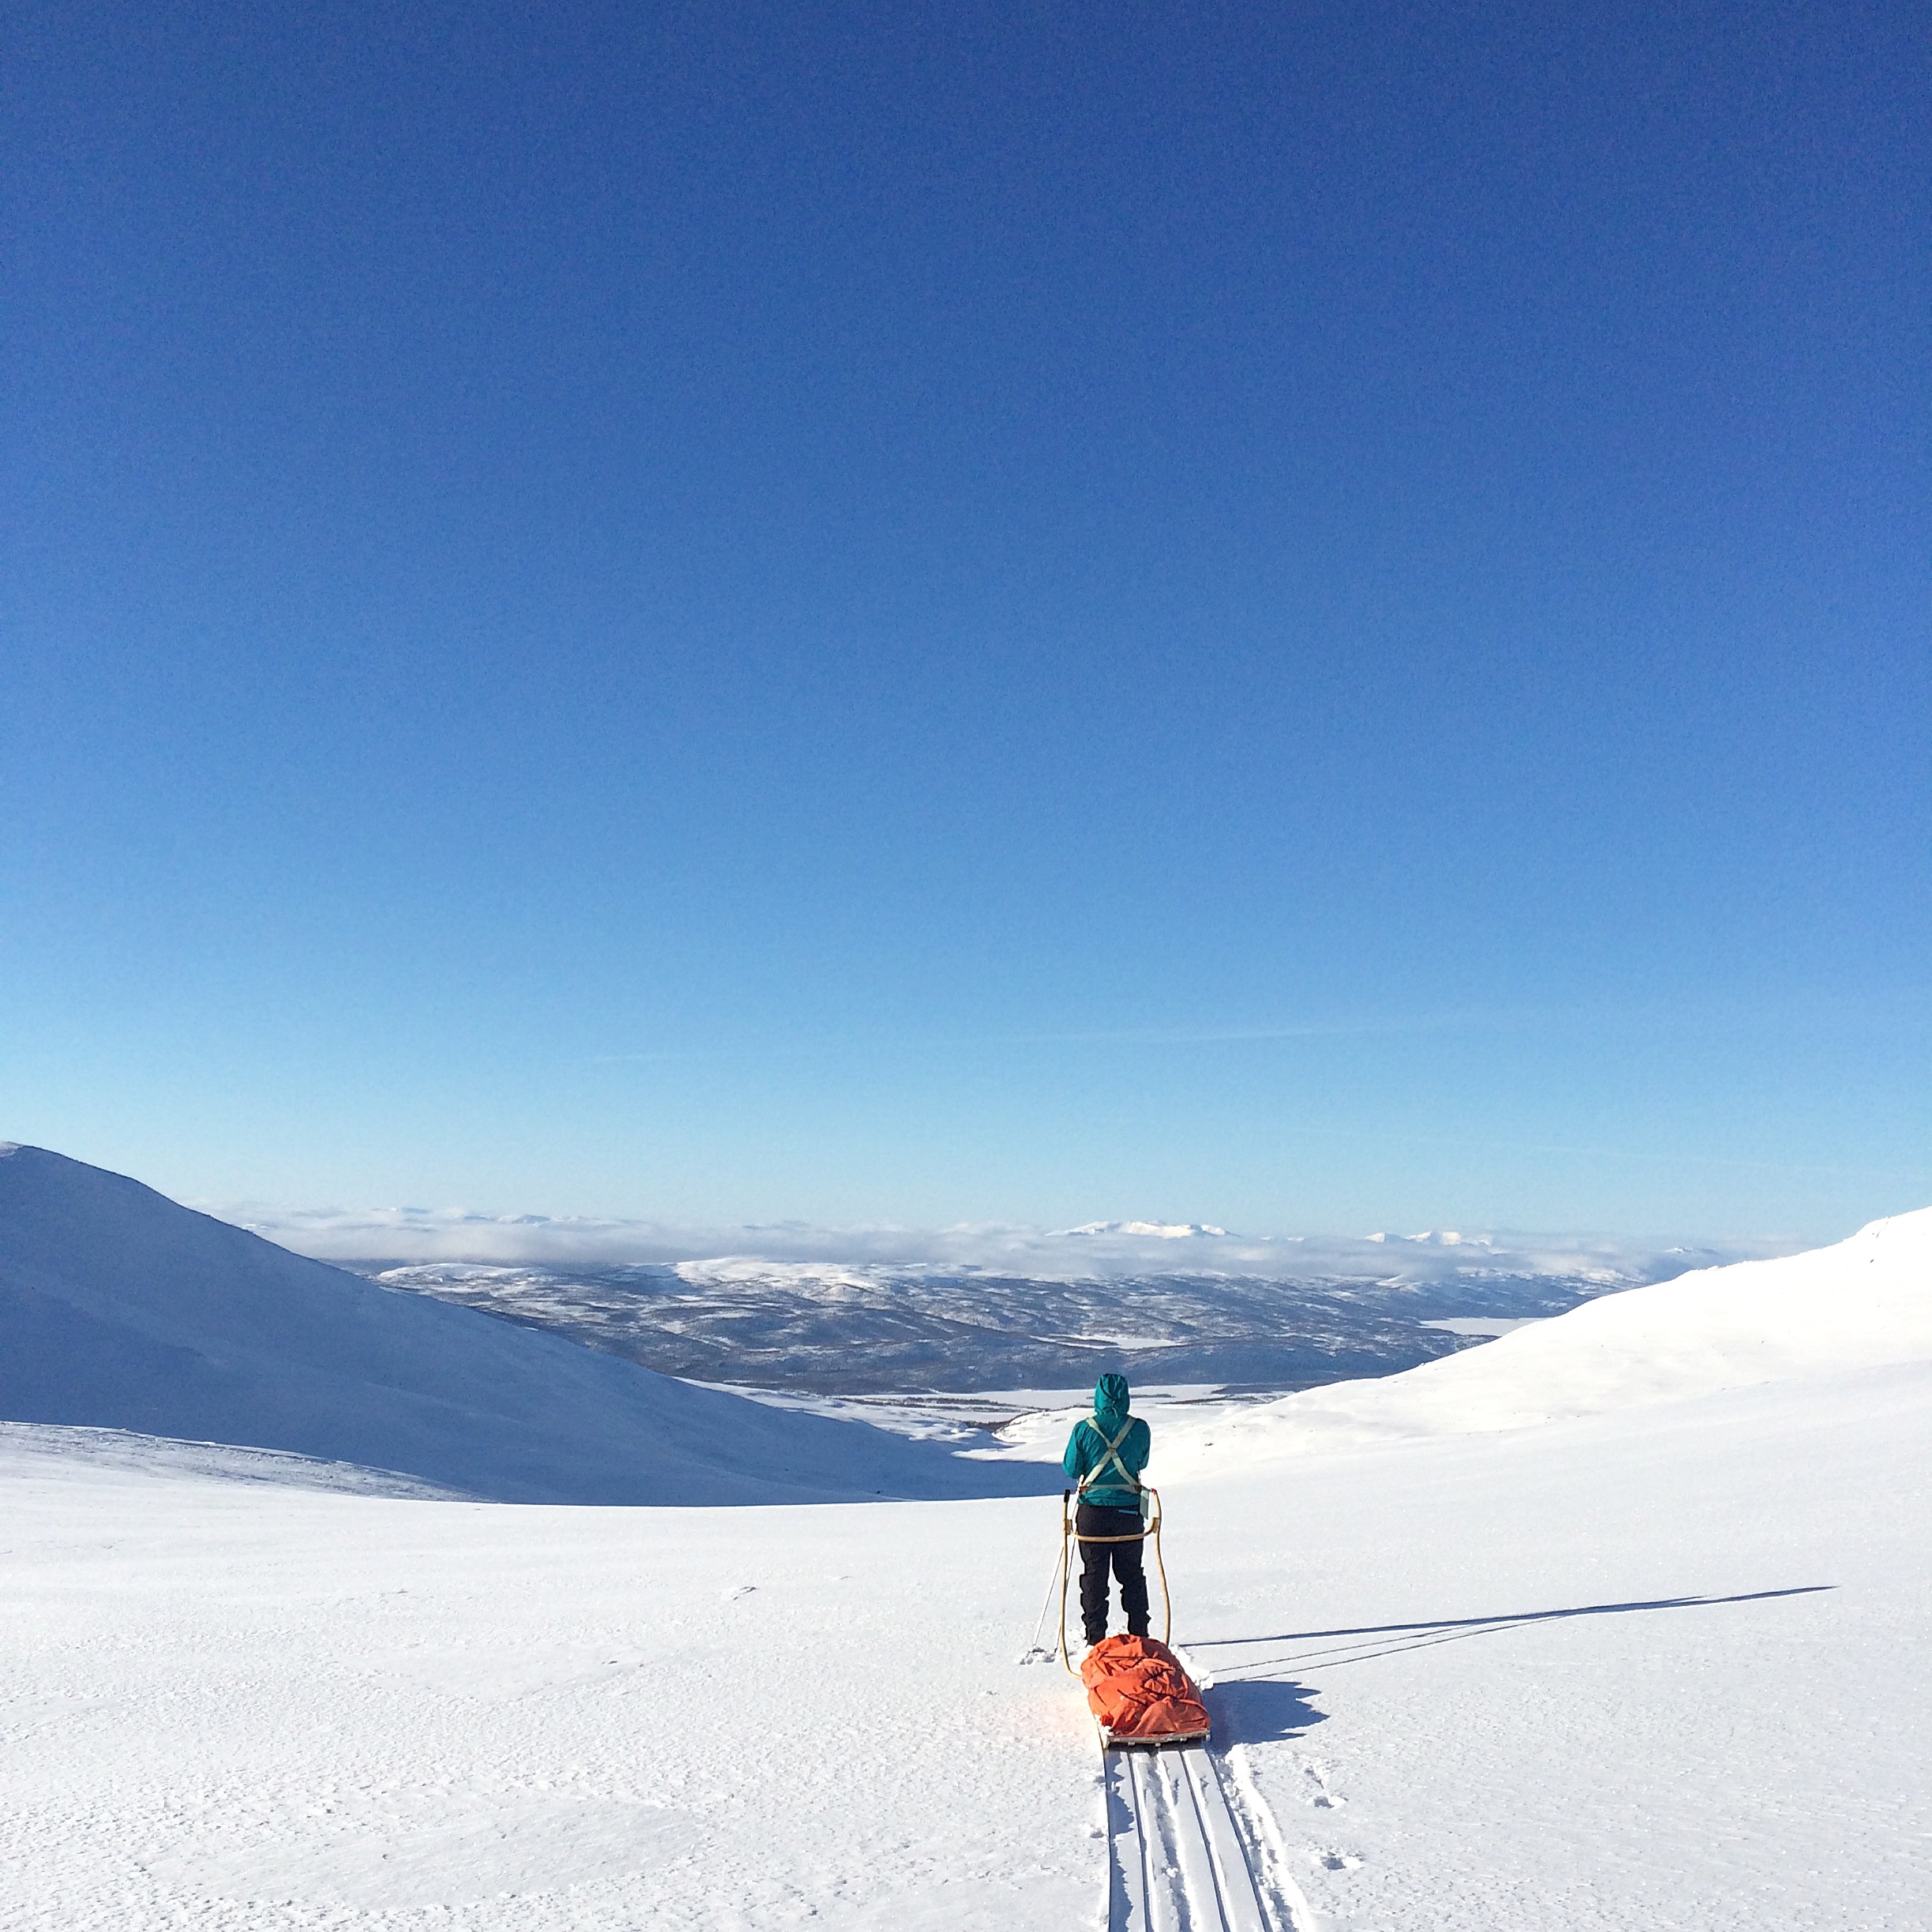 Cross country skier in a sunny mountain landscape